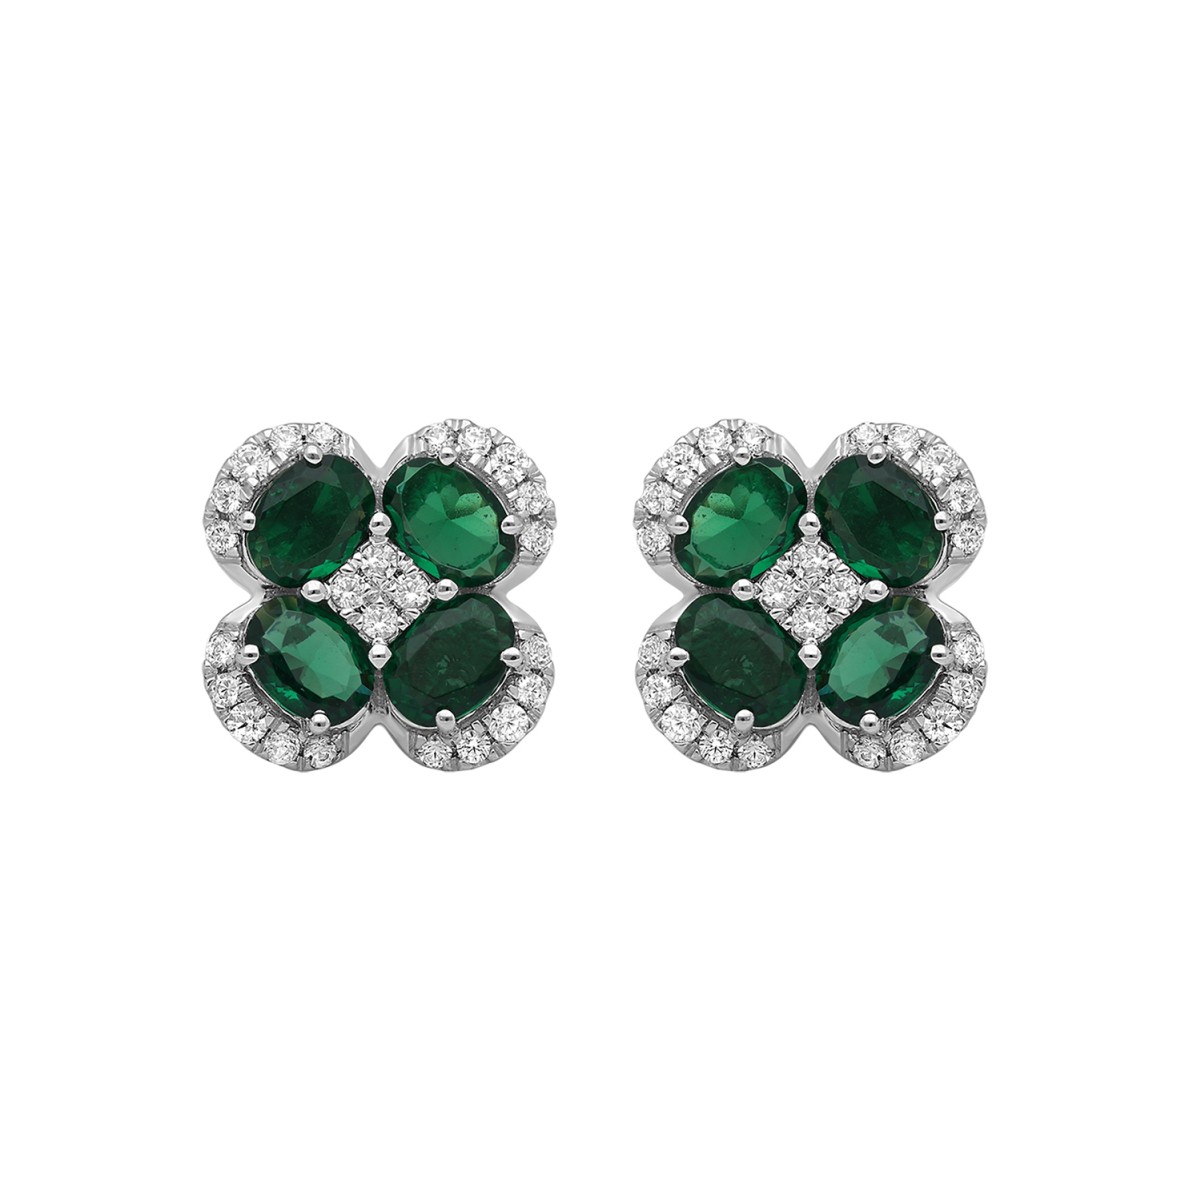 18K WHITE GOLD 2 1/4CT ROUND/OVAL DIAMOND LADIES EARRINGS(COLOR STONE OVAL GREEN EMERALD DIAMOND 2CT)